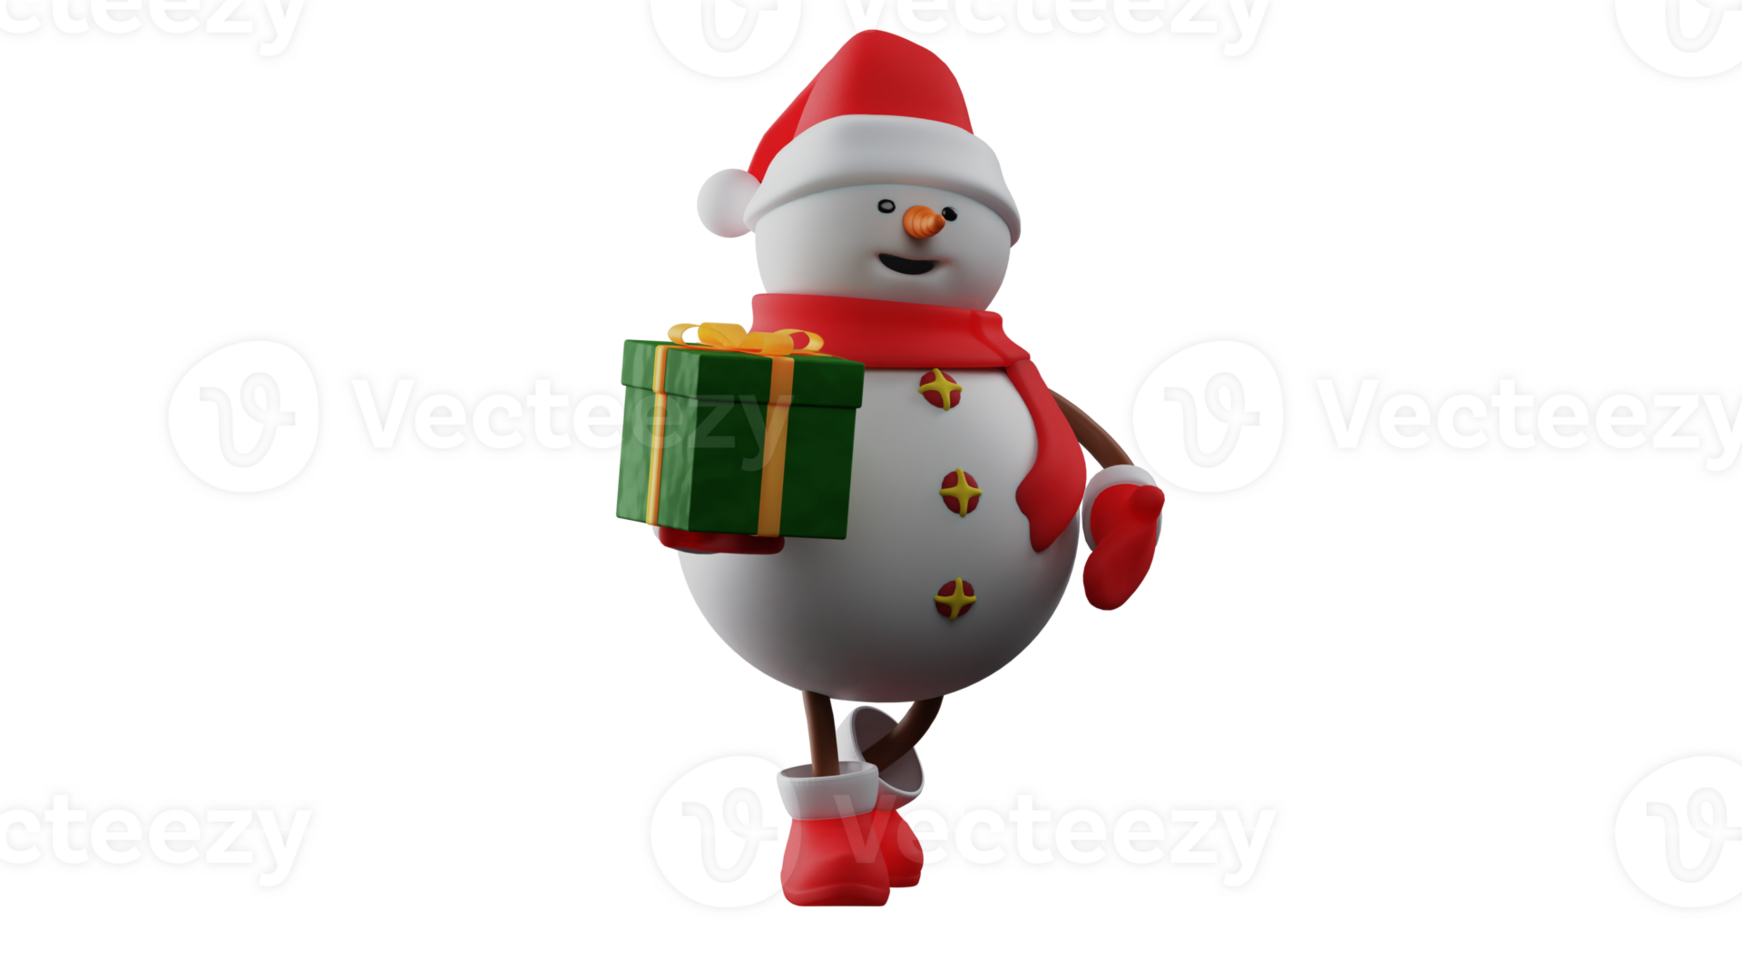 3D illustration. Romantic Snowman 3D cartoon character. Snowman brought a gift box for the Christmas celebration. Snowman is happy to be able to give someone a present. 3D cartoon character png